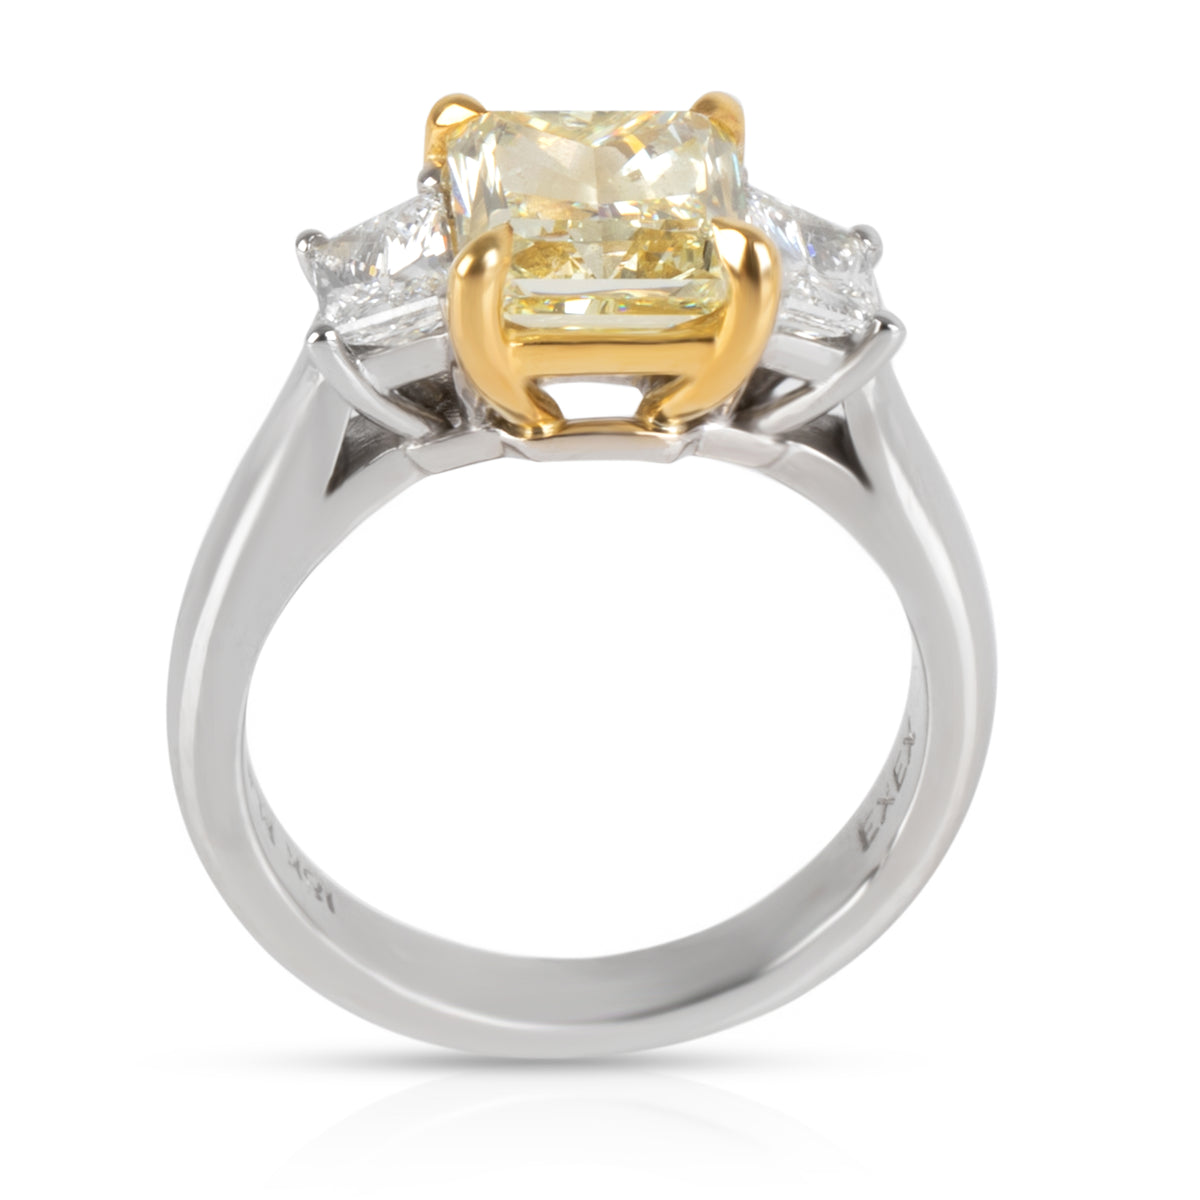 Fancy Yellow Diamond Engagement Ring in Platinum GIA Certified VS2 2.13 CTW